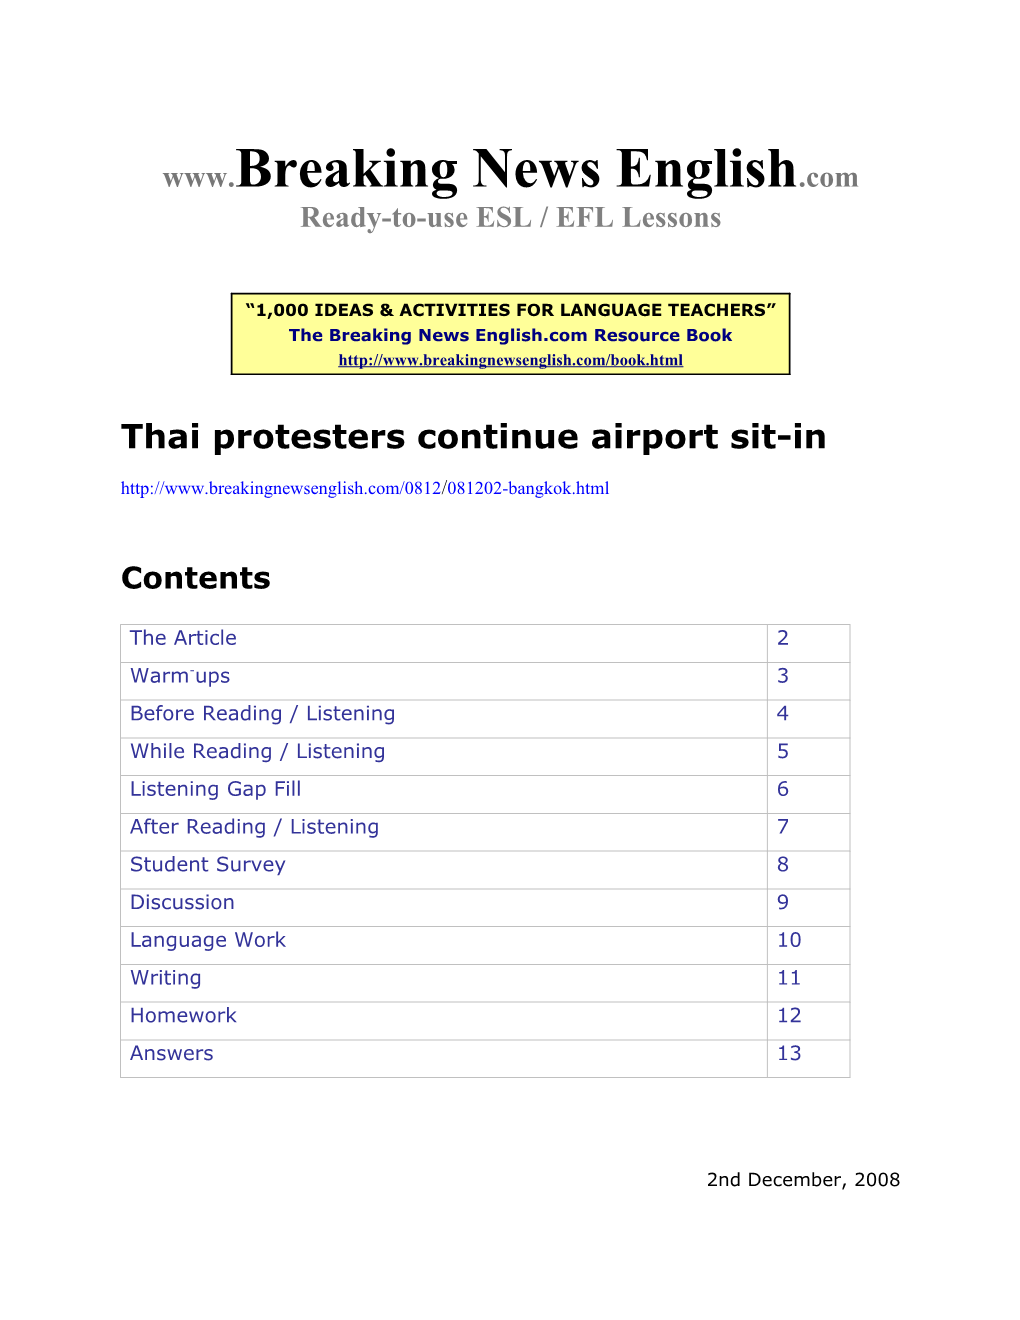 ESL Lesson: Thai Protesters Continue Airport Sit-In